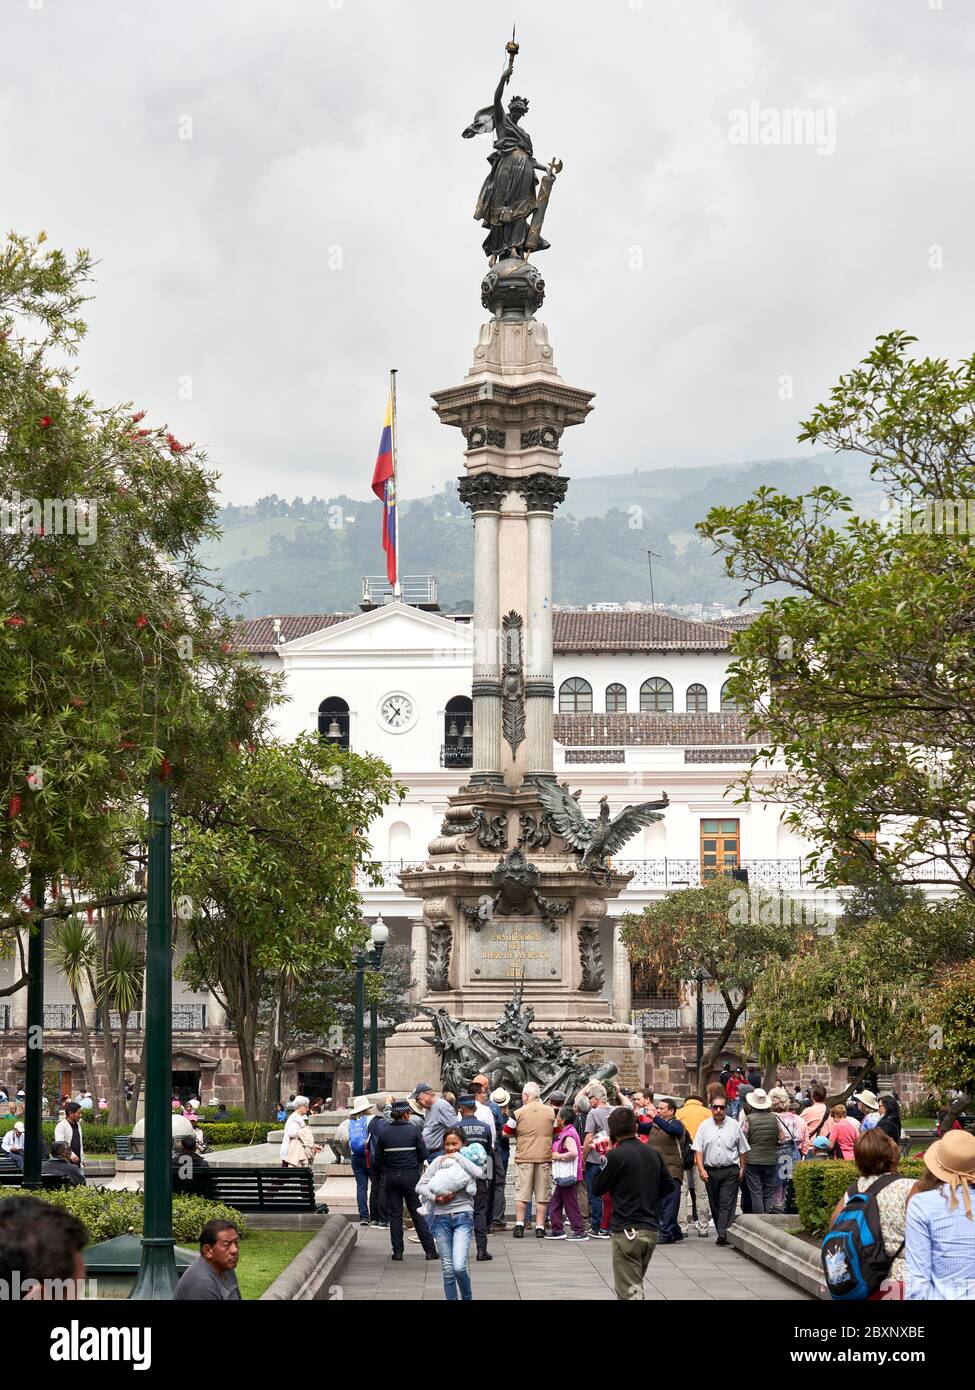 Statue of Liberty in Independence Square, Quito, Ecuador Stock Photo